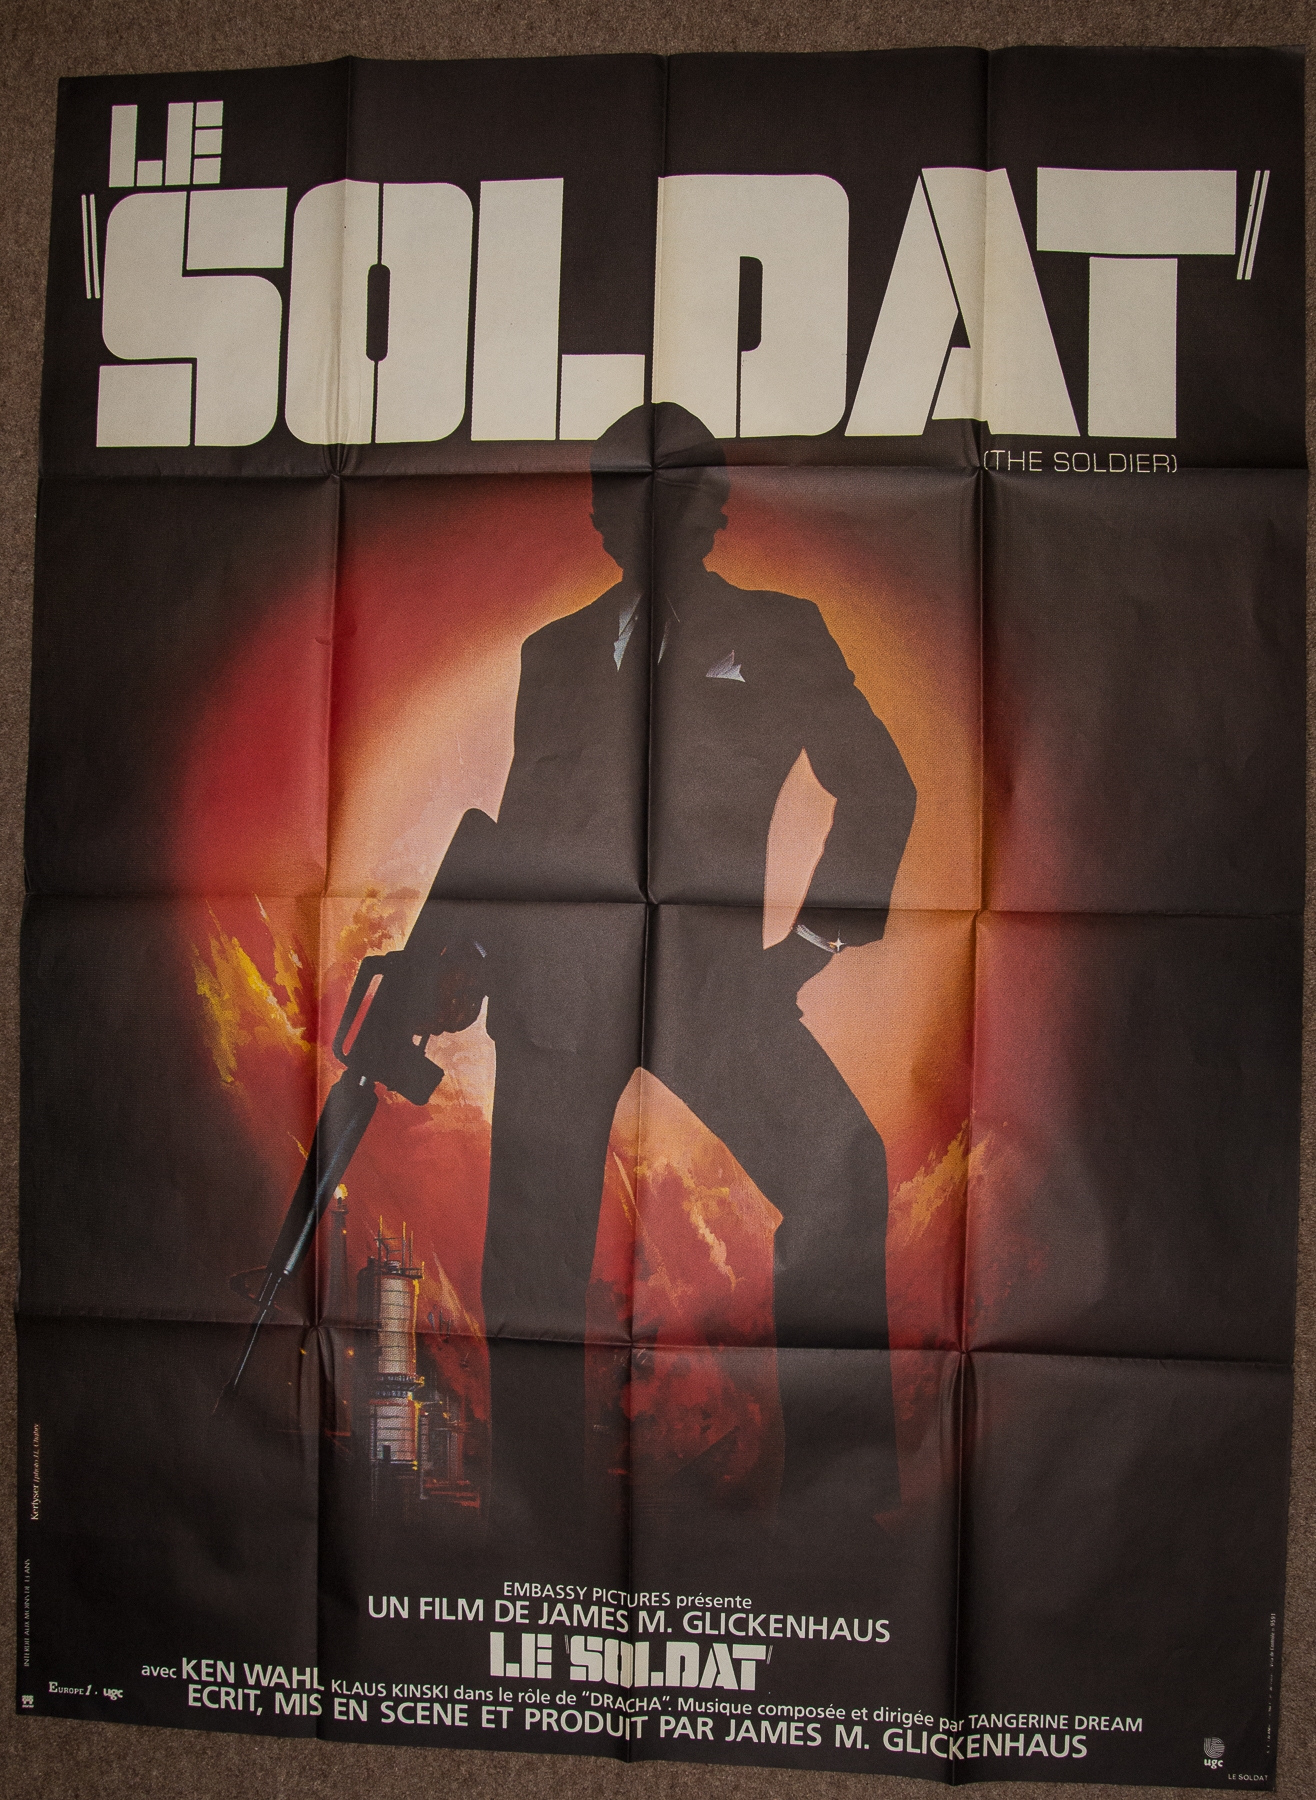 A Group of French WAR film posters - COMMANDO AU VIET-NAM (A YANK IN VIETNAM) (1964) -Poster with - Image 4 of 4